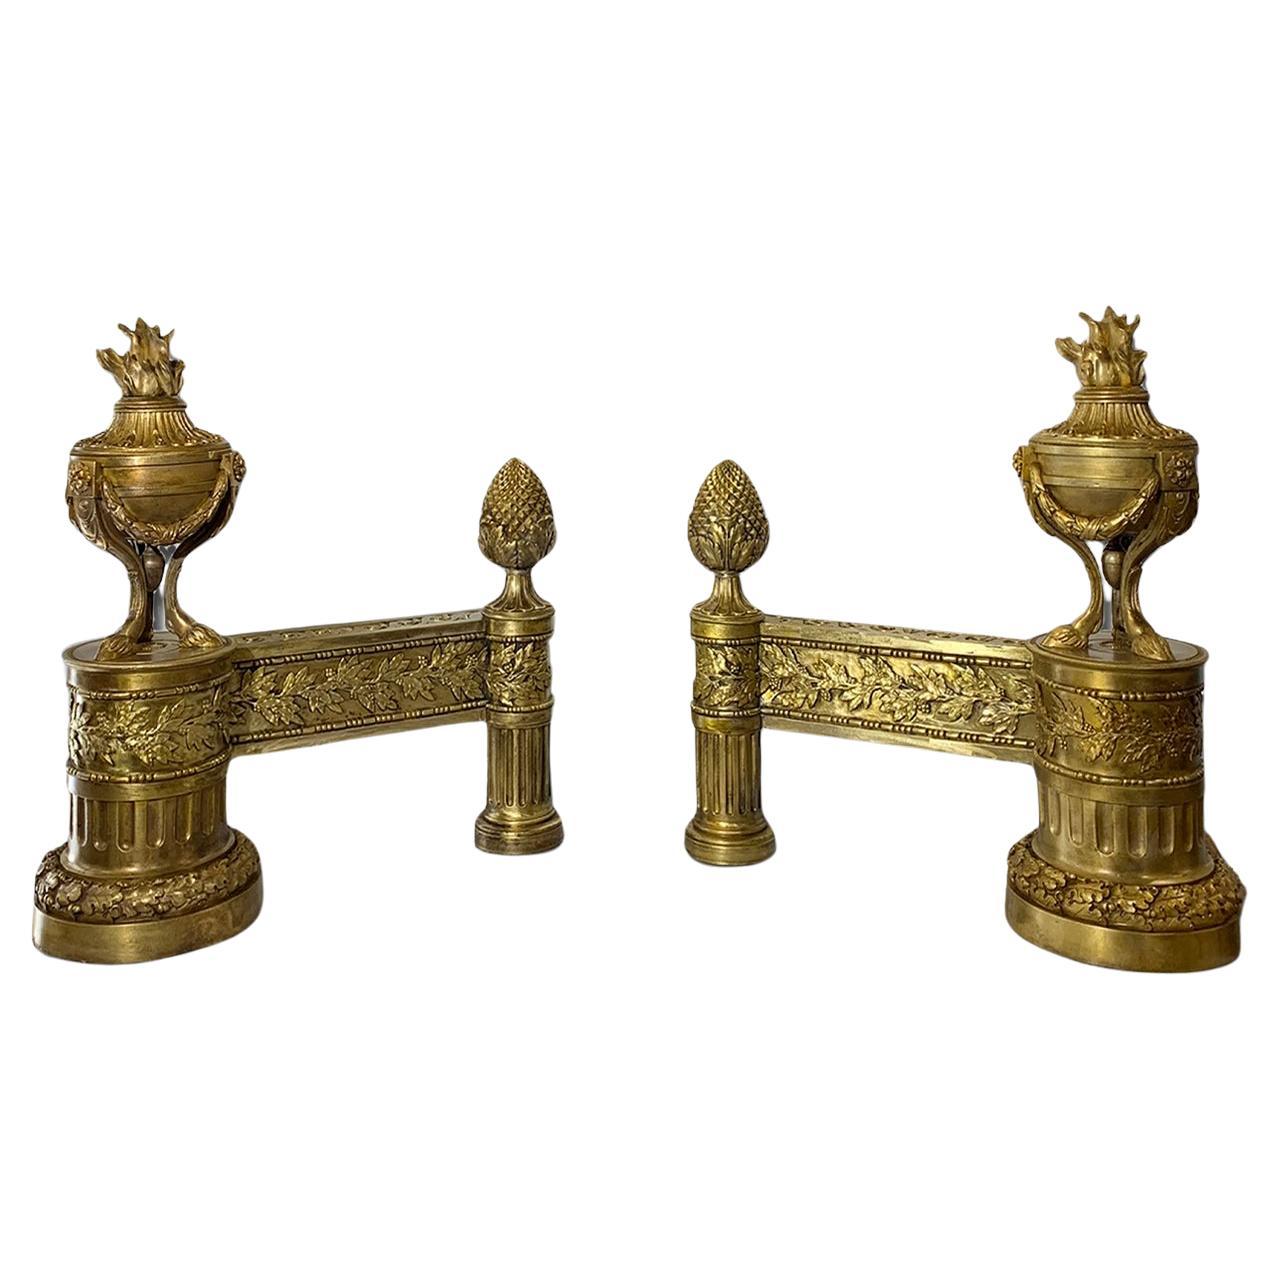 LATE 18th CENTURY PAIR OF NEOCLASSICAL GILDED BRONZE ANDIRONS For Sale